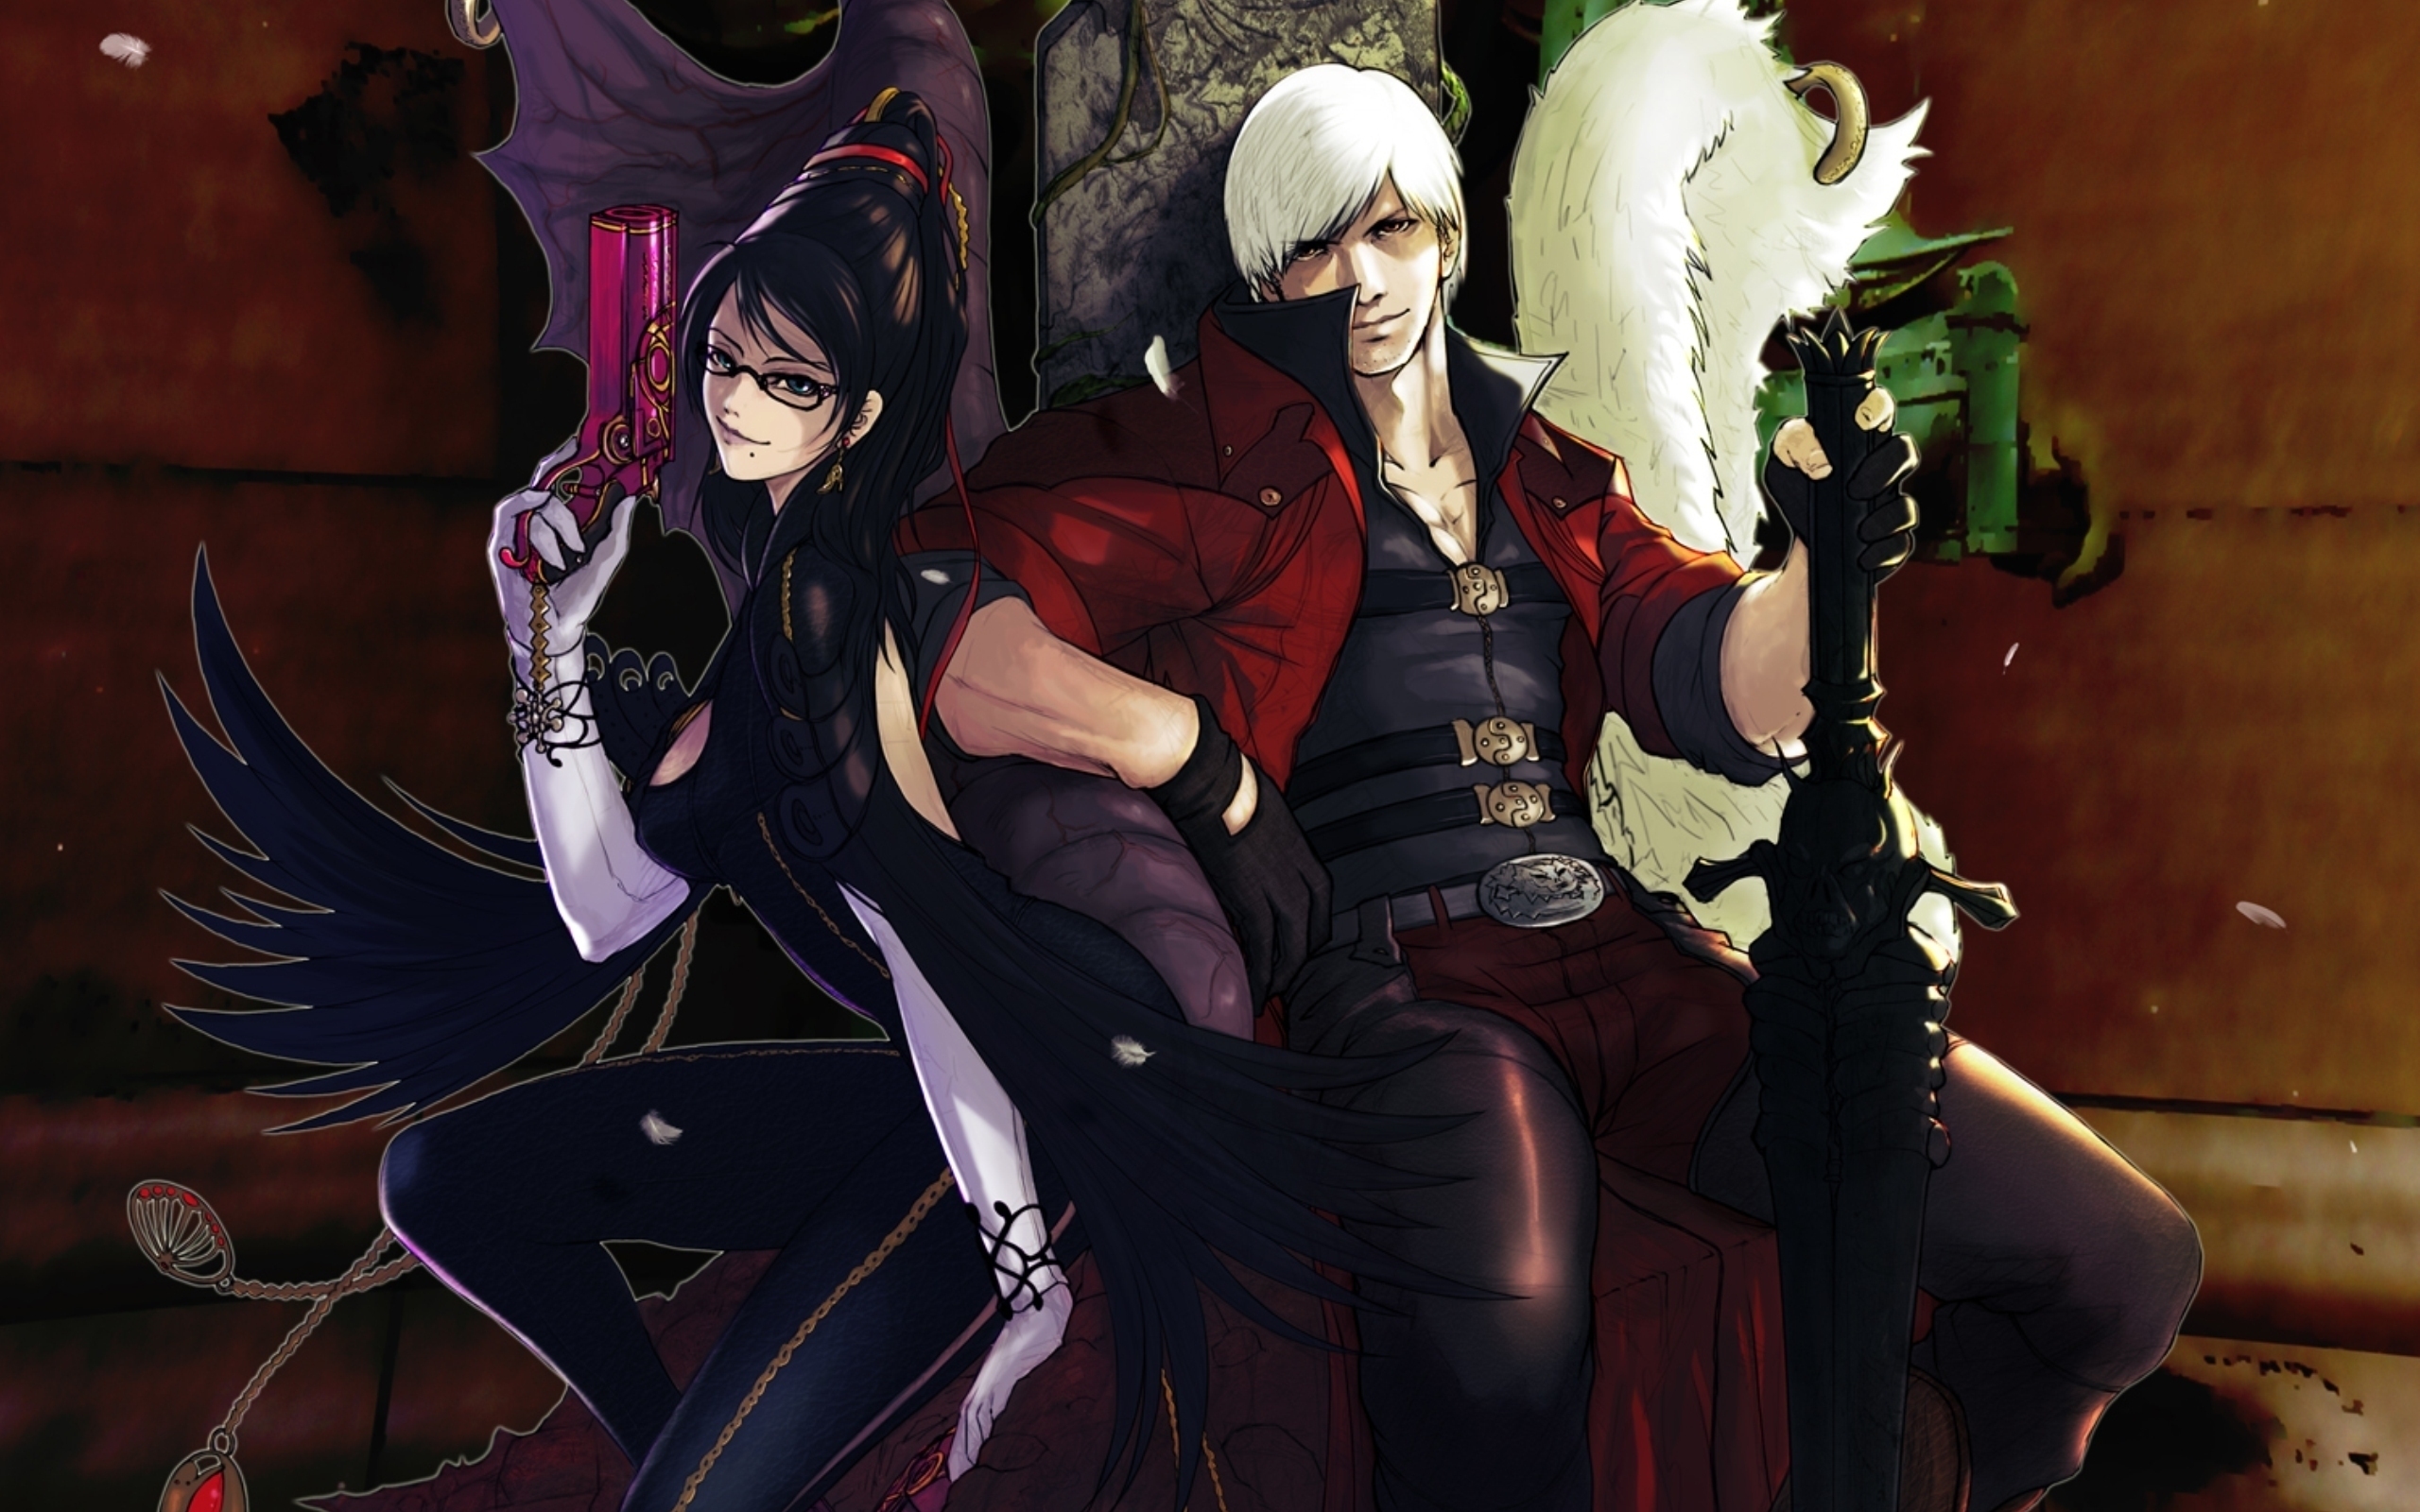 Bayonetta VS Devil May Cry 4 for 2560 x 1600 widescreen resolution